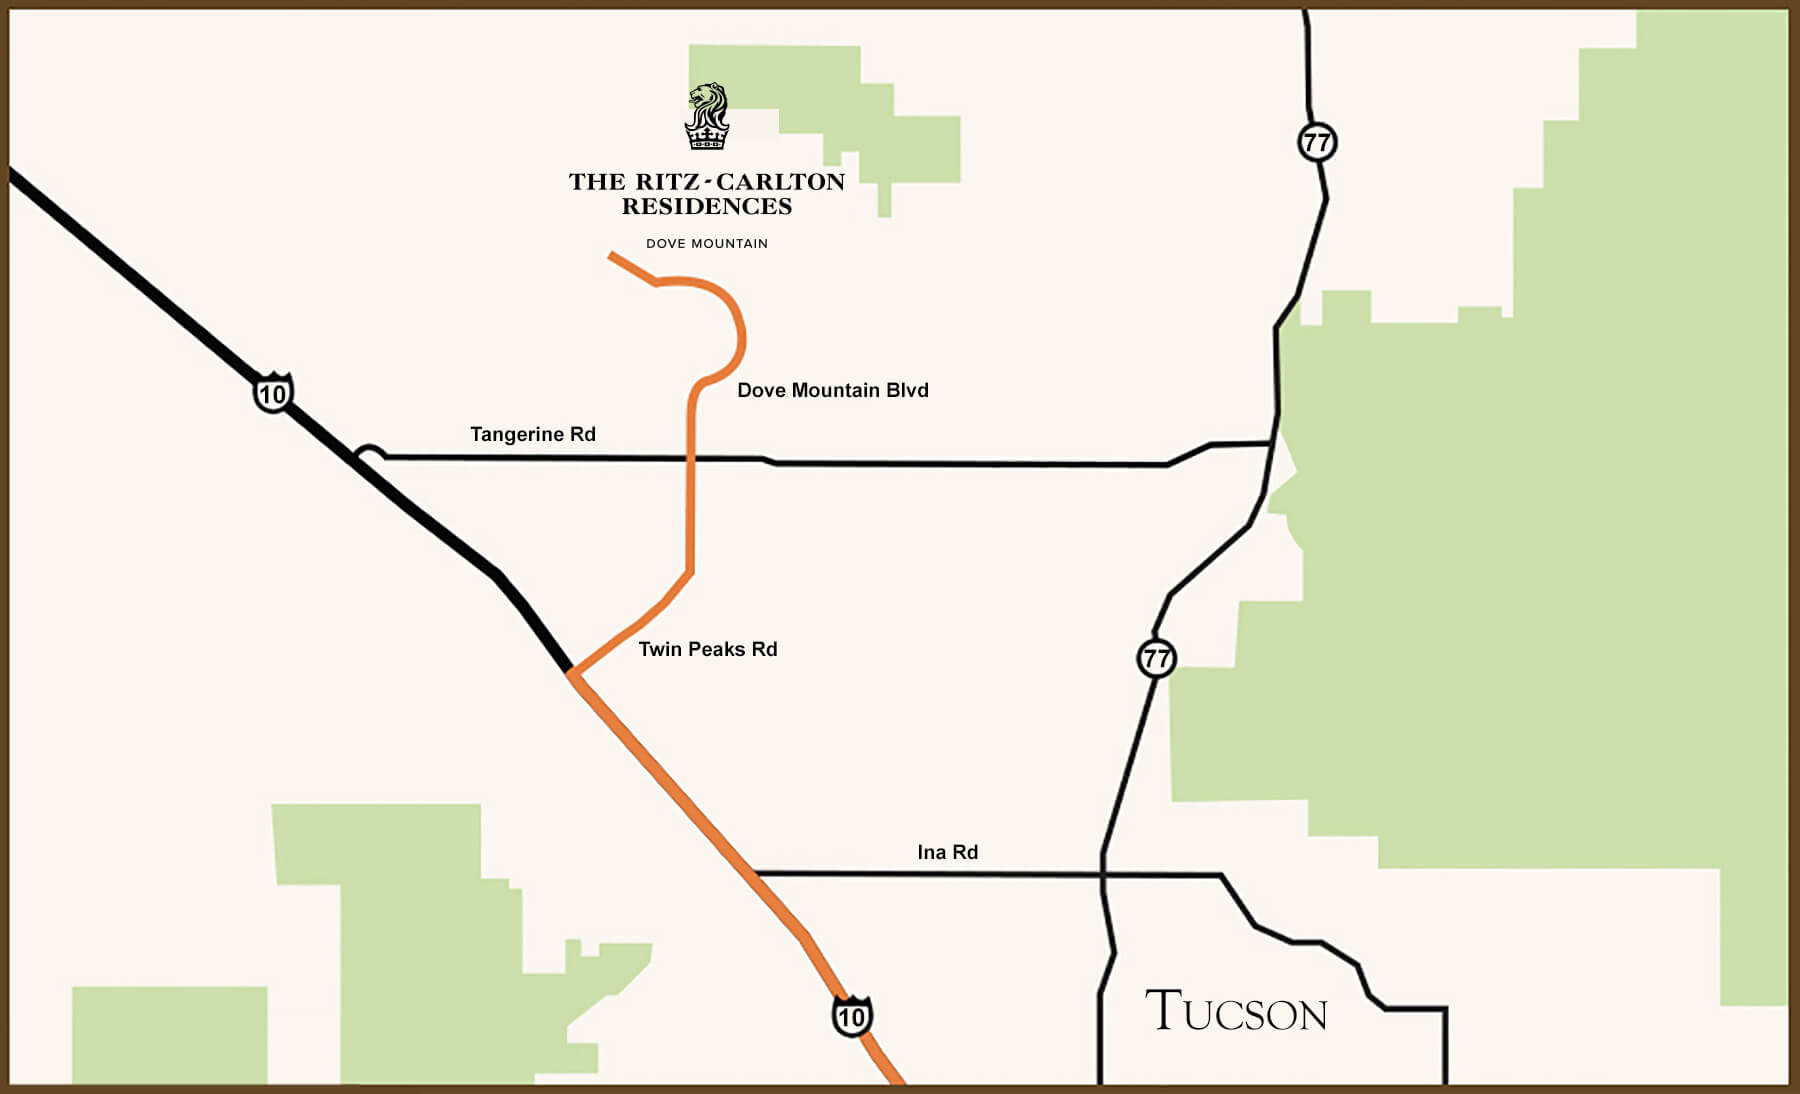 Turn by turn driving directions from Tucson to our luxury Dove Mountain real estate community located in Marana, Arizona.